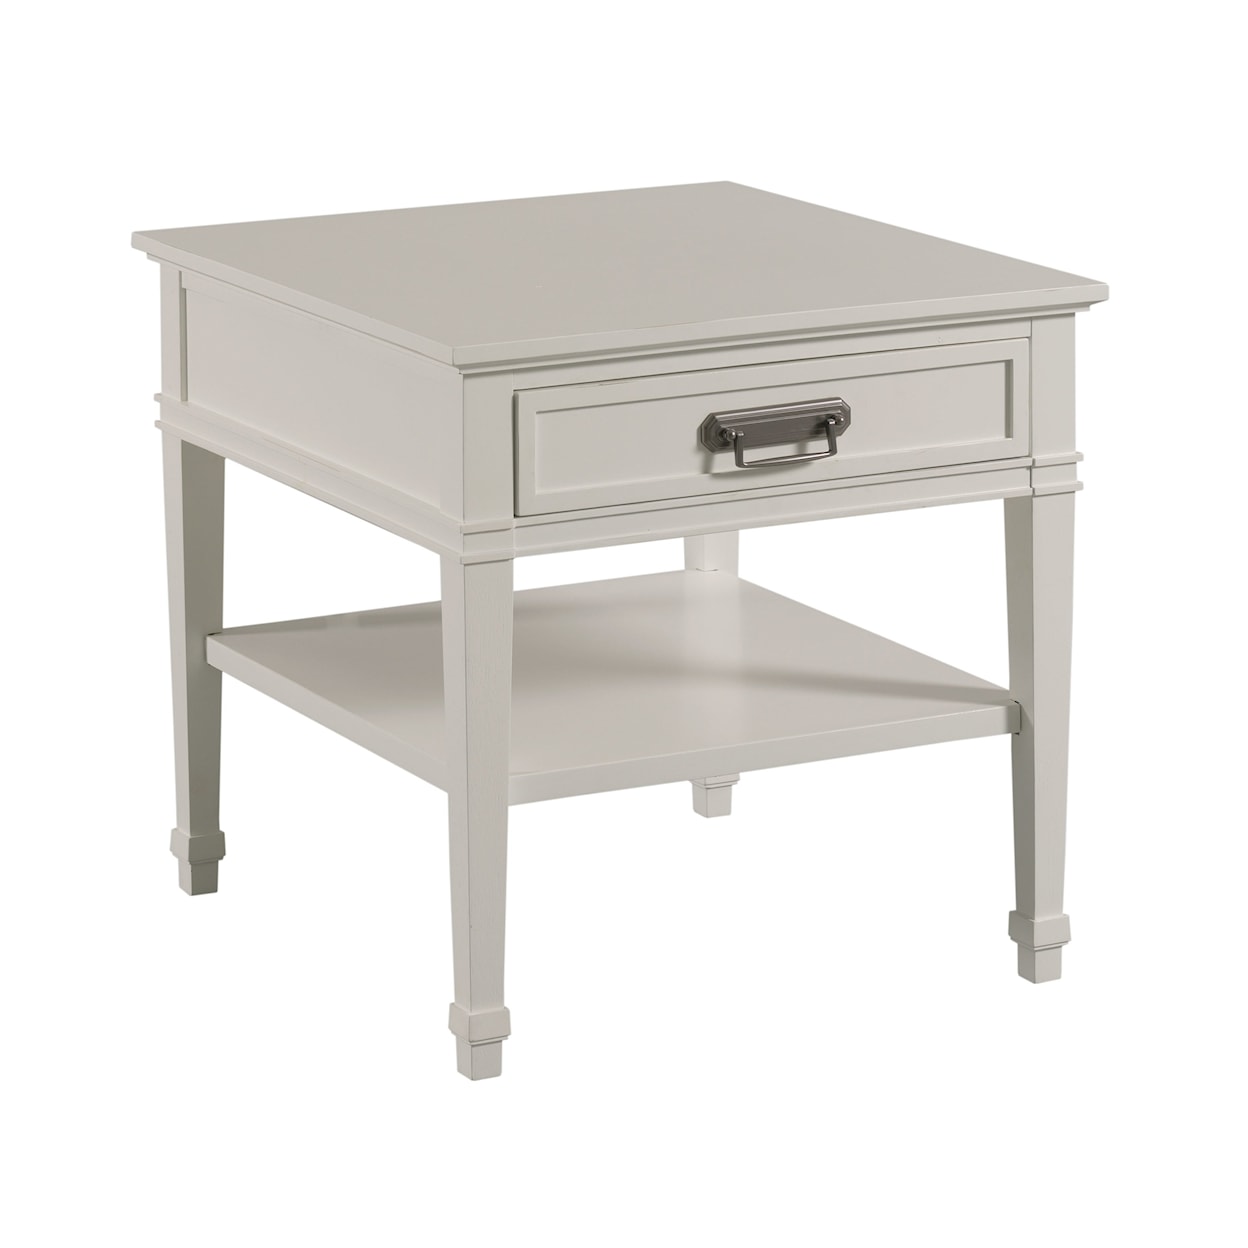 Hammary Structures Rectangular End Table